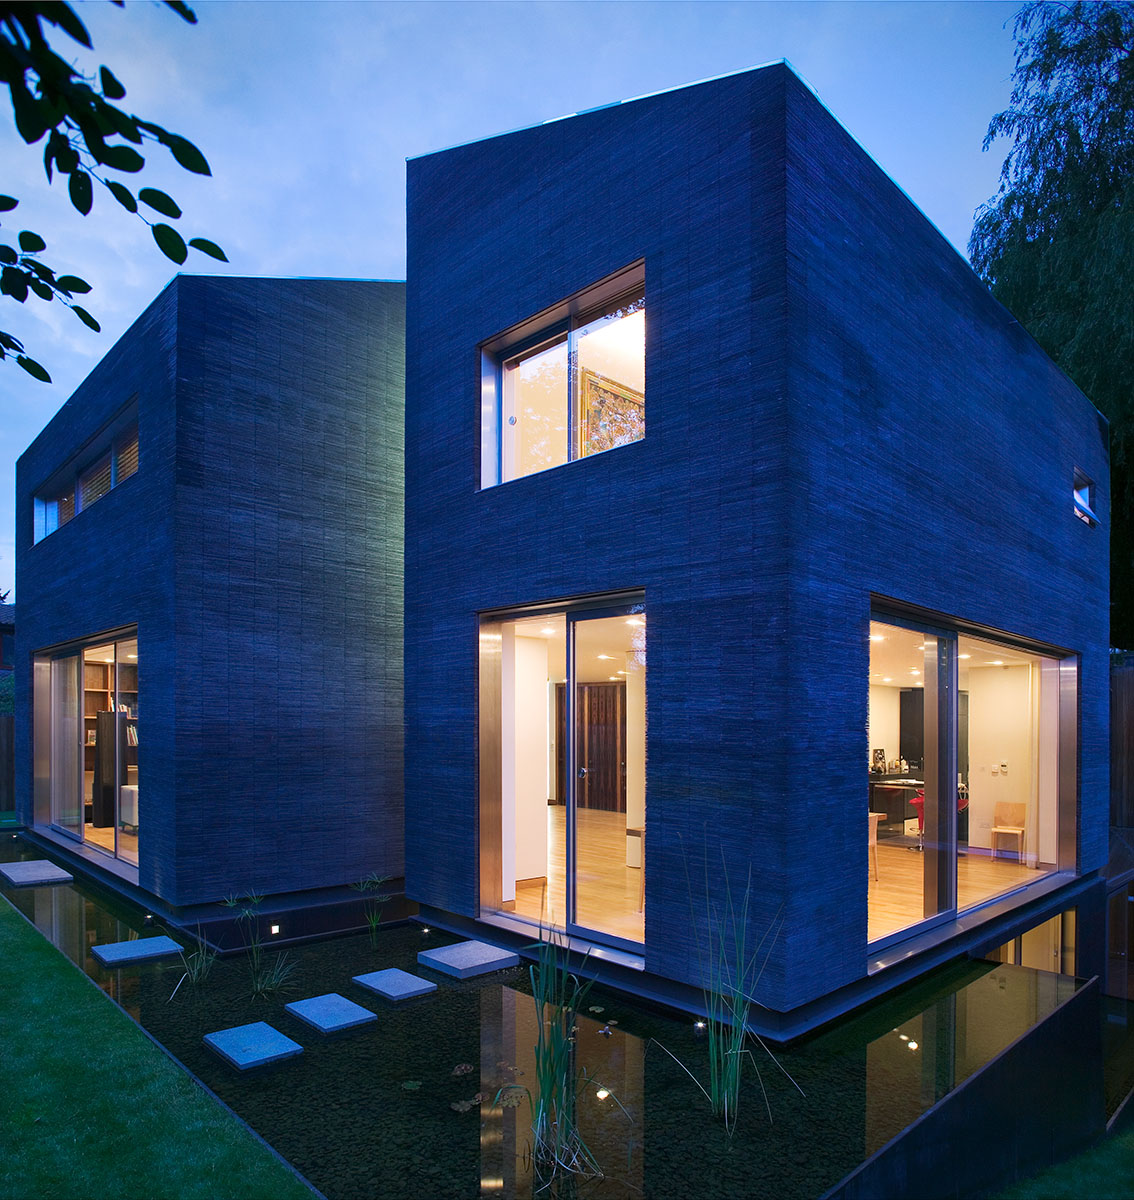 New build moated private residence fronting onto Hampstead HeathClient: Mind's Eye Design